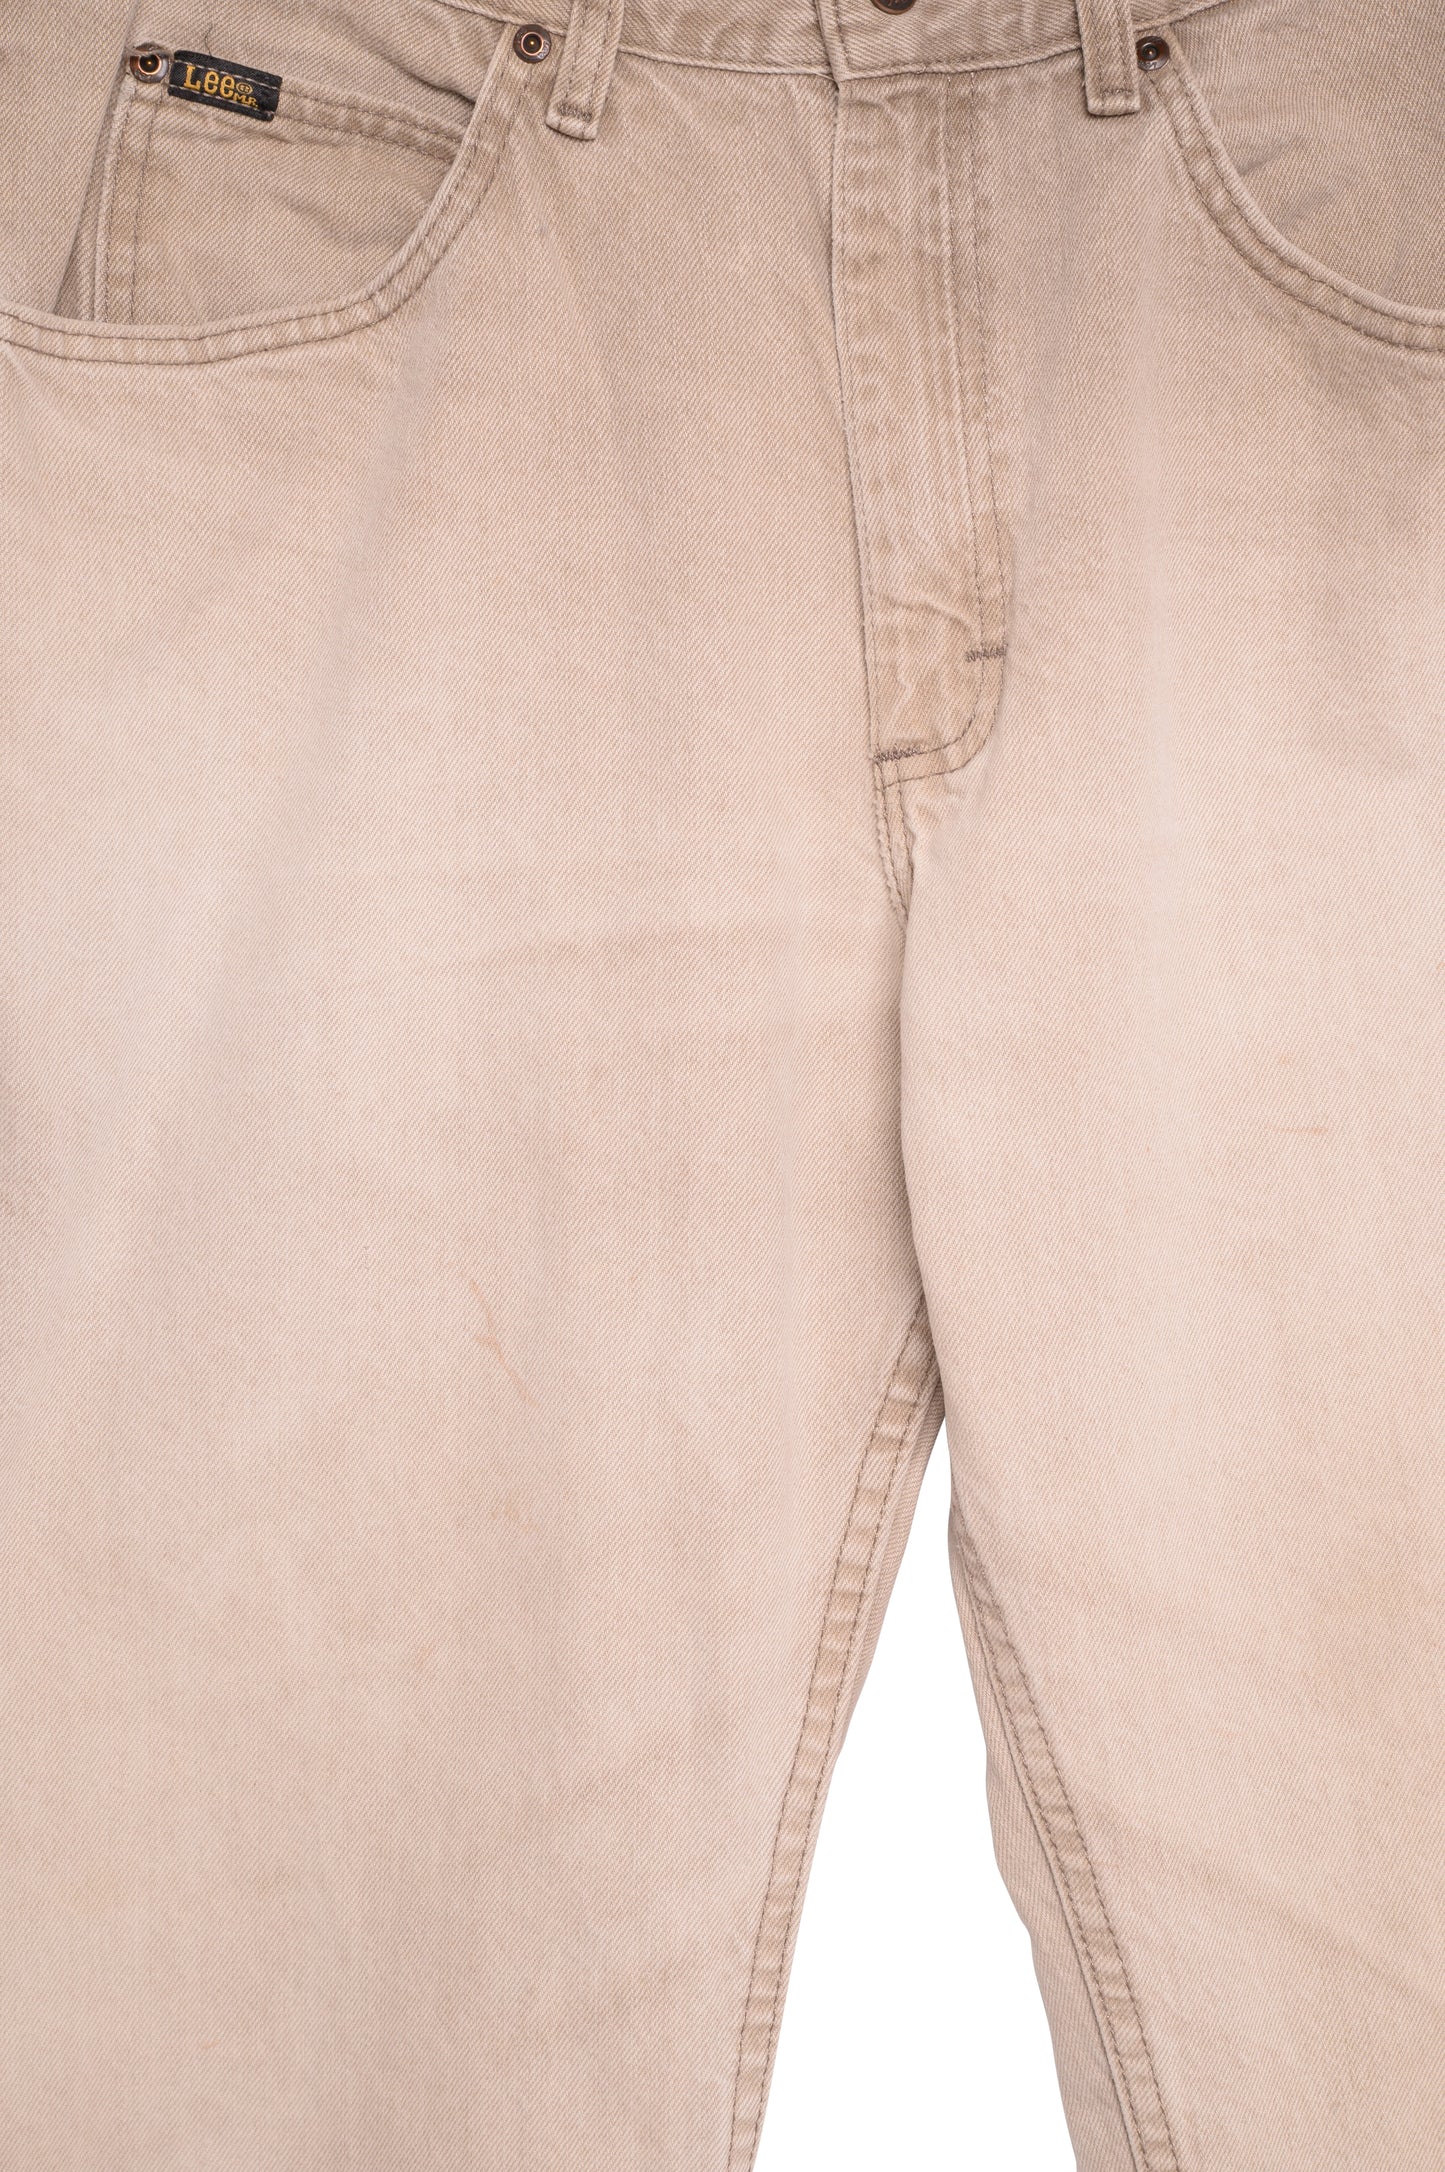 Faded Lee Tapered Jeans